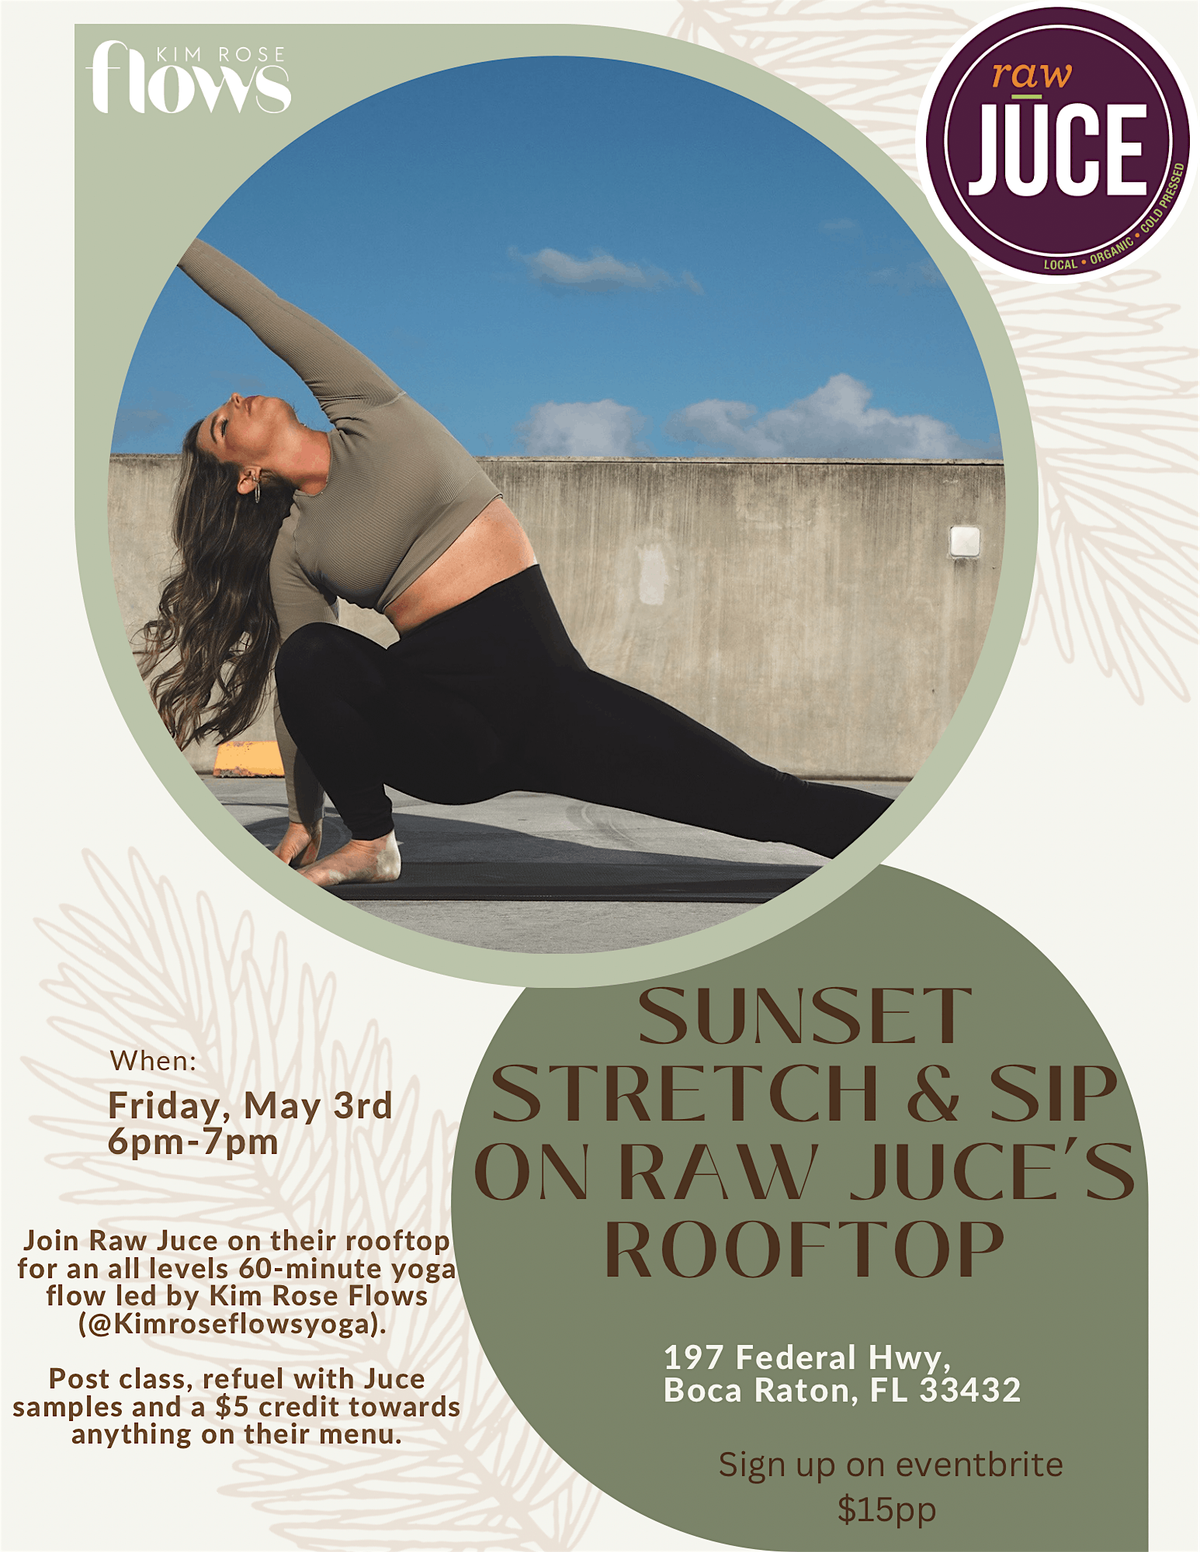 Sunset Stretch & Sip on Raw Juce\u2019s Rooftop